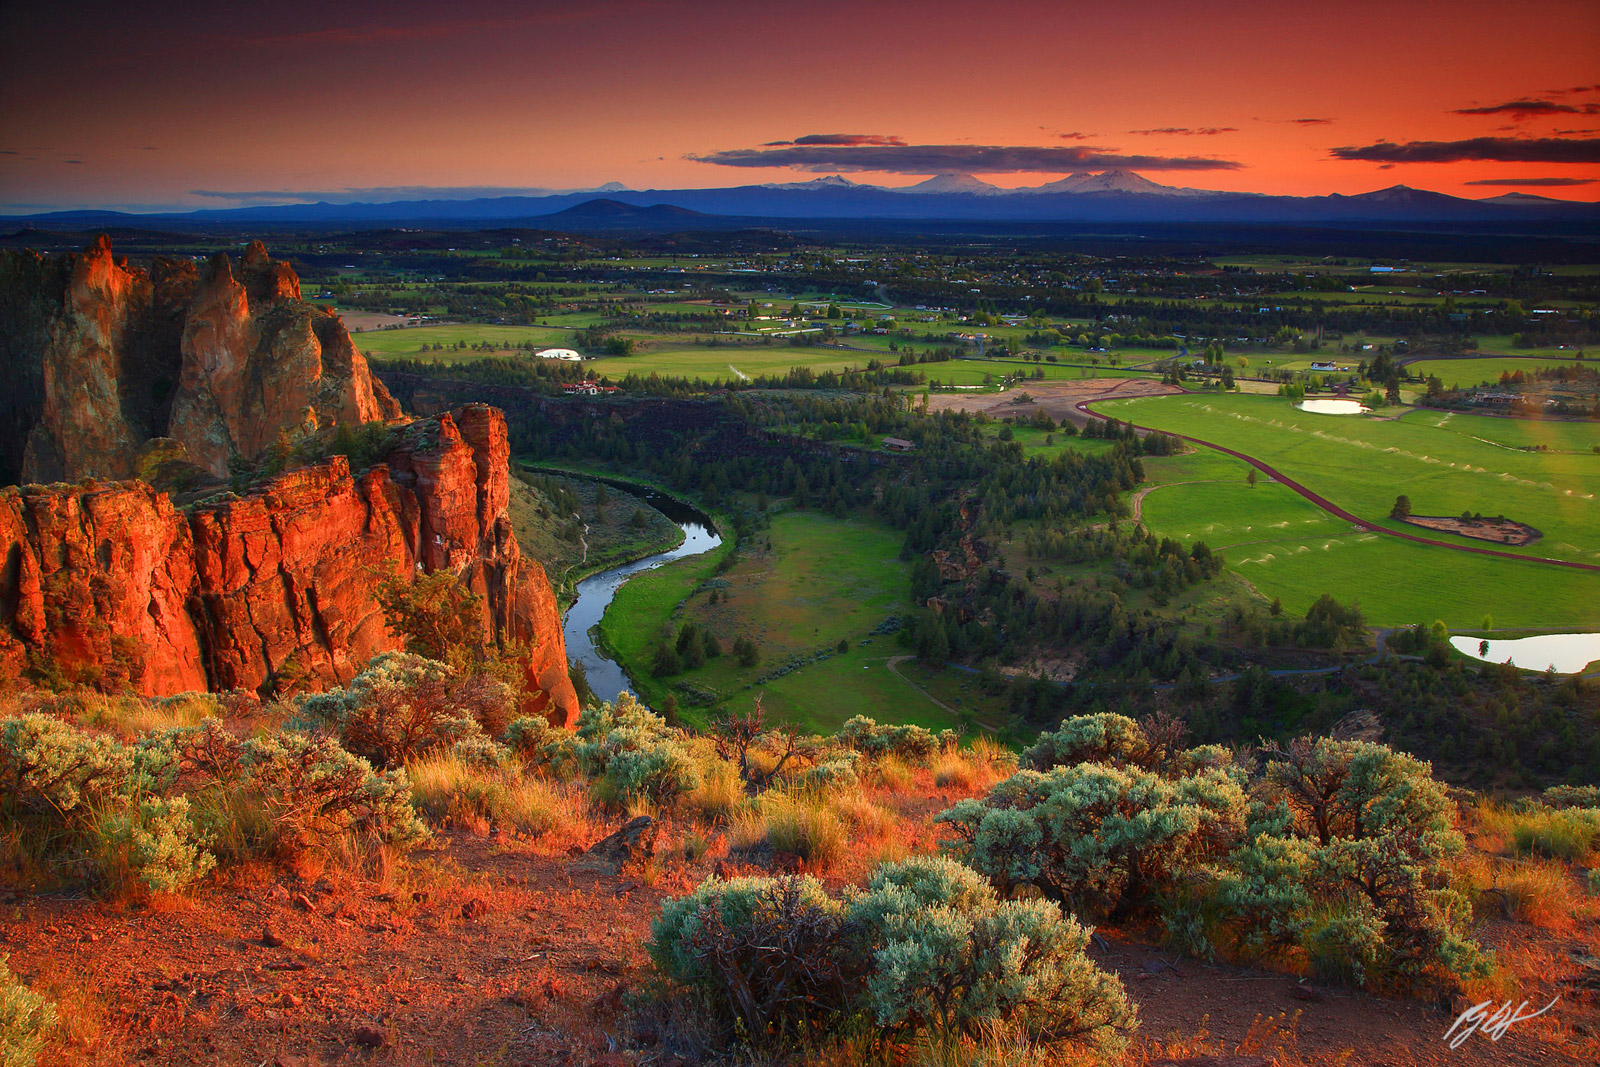 Sunset With the Three Sisters from Smith Rock, Smith Rock State Park in Oregon